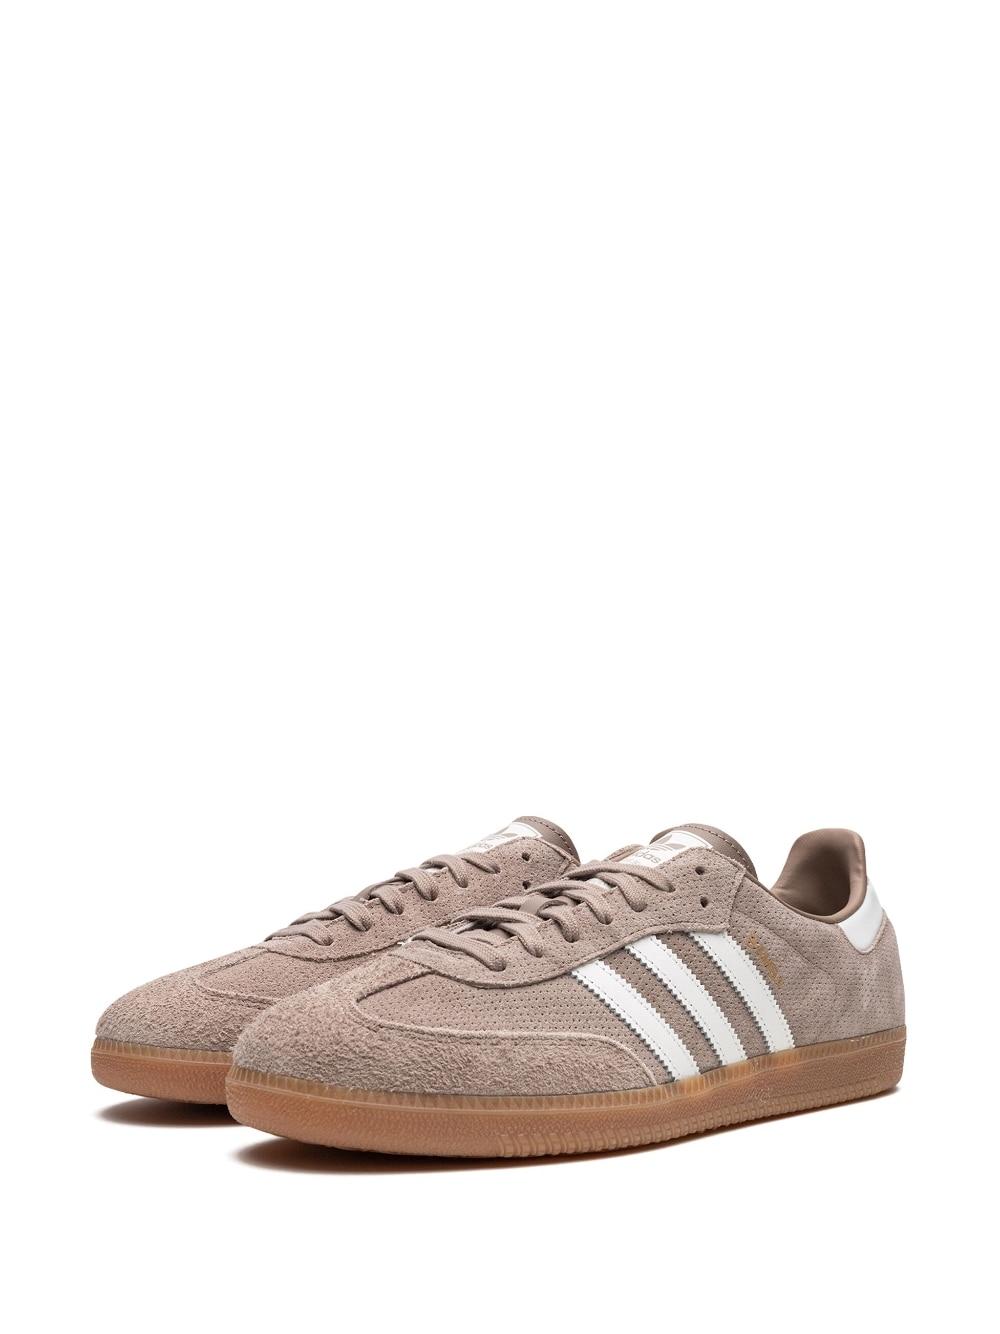 adidas Samba Og "chalky Brown Gum" Sneakers | Lyst